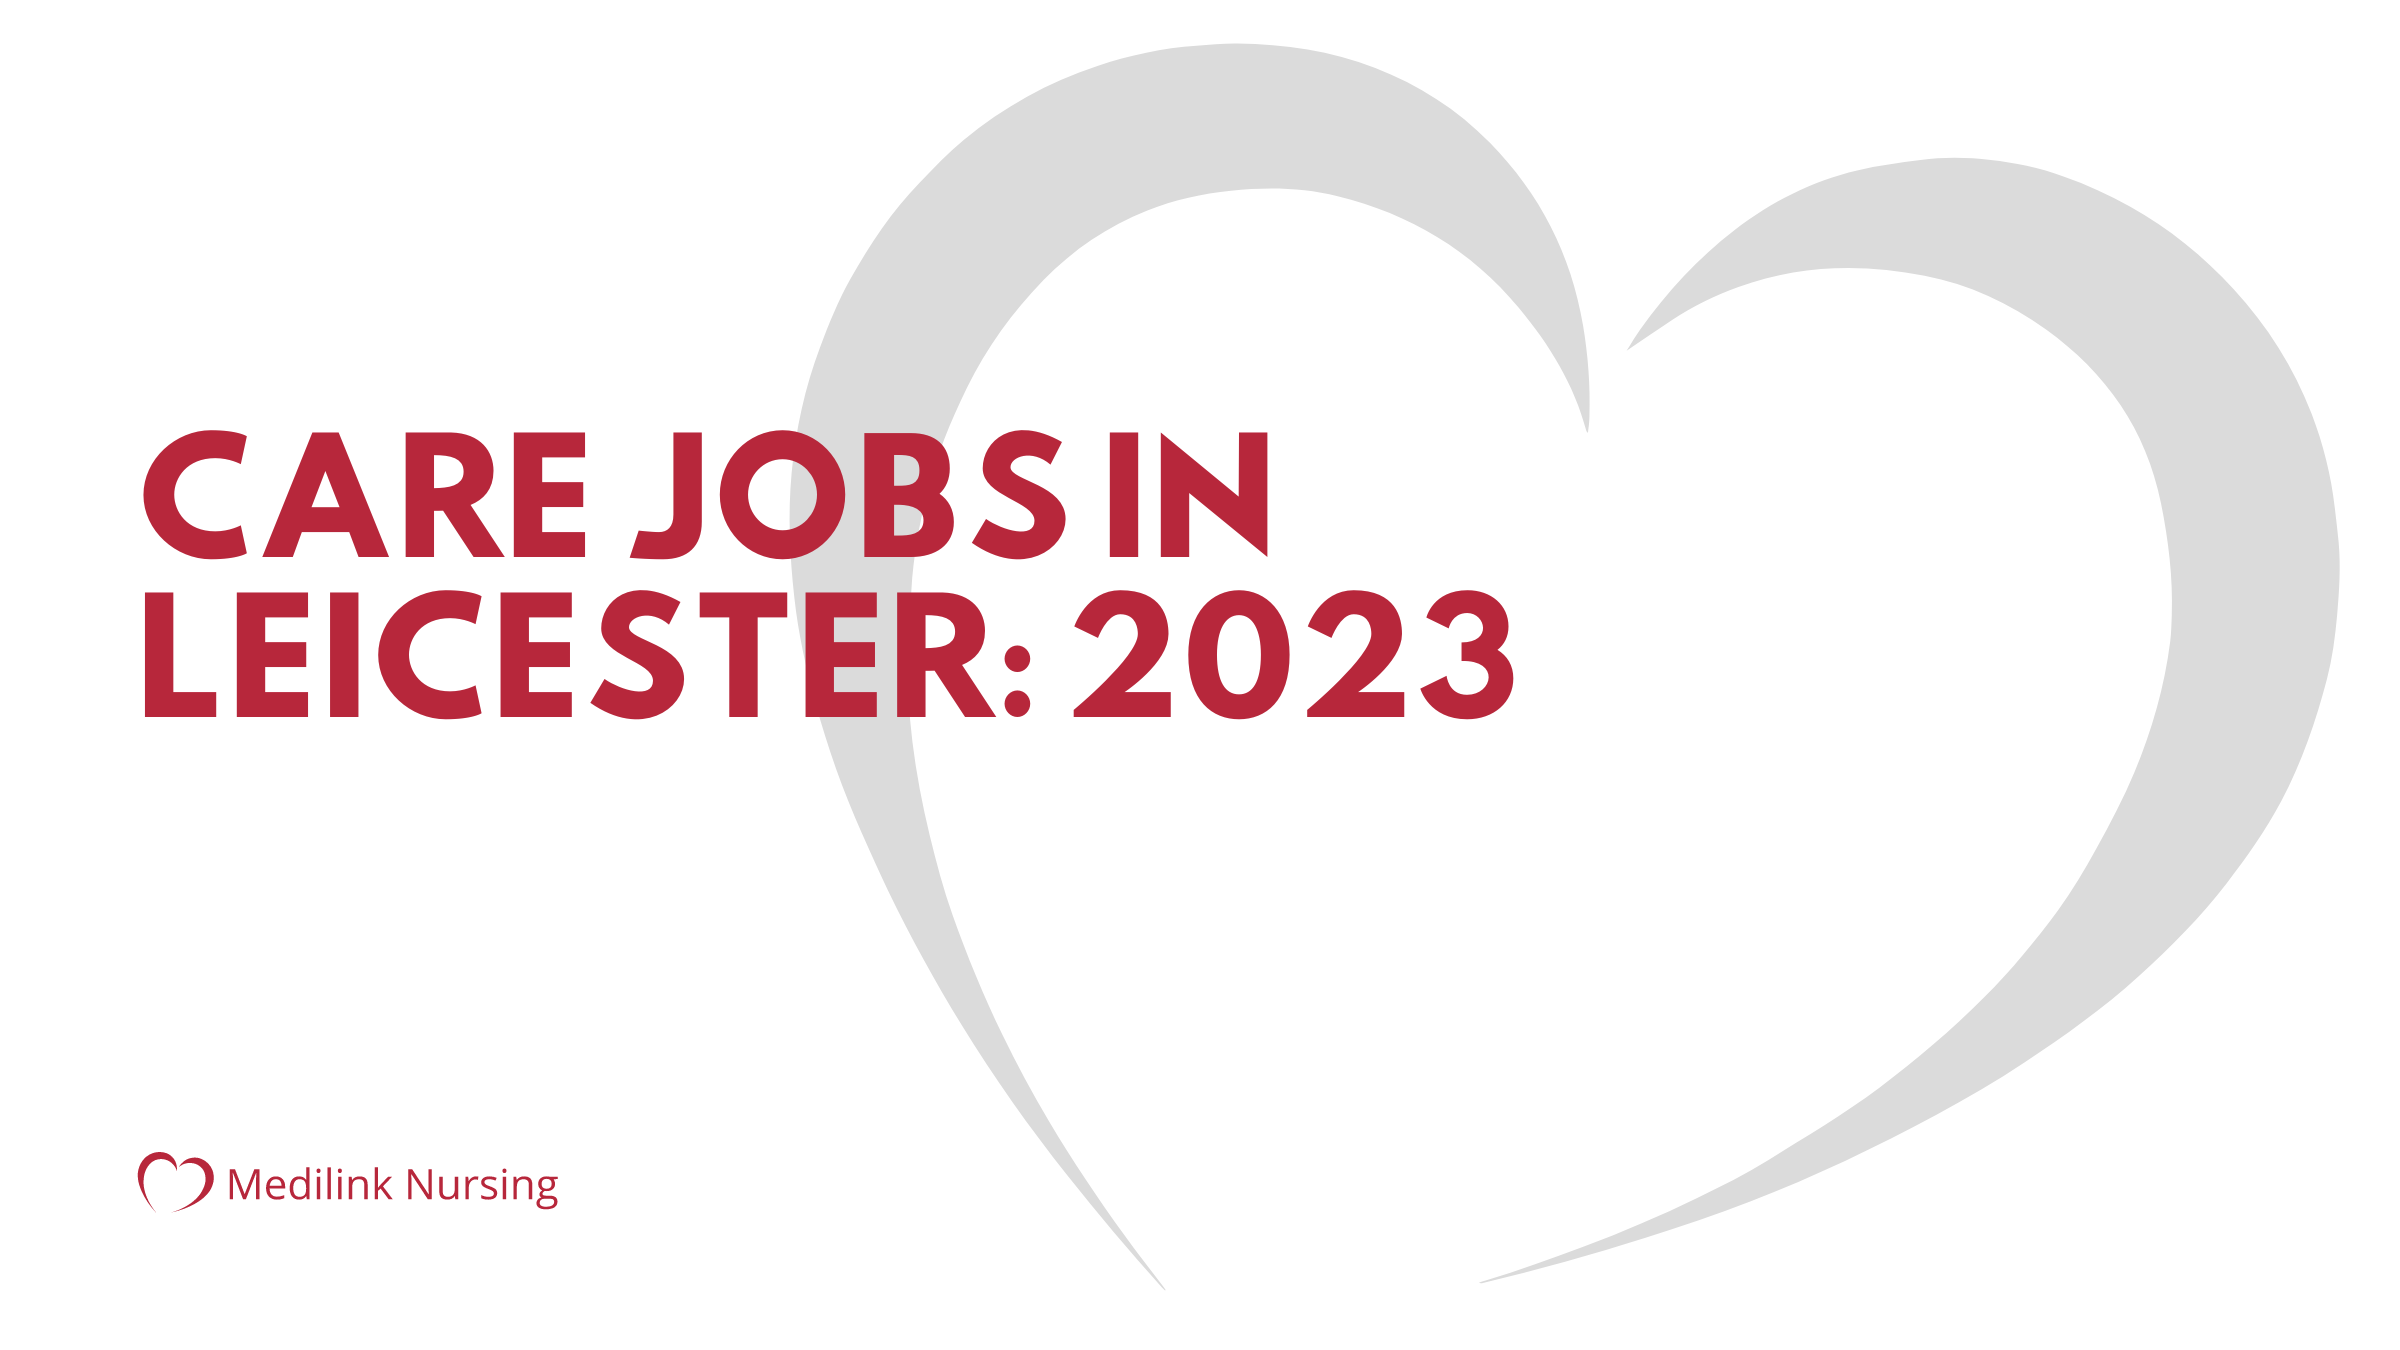 Care Jobs in Leicester – Available With Medilink Nursing in 2023